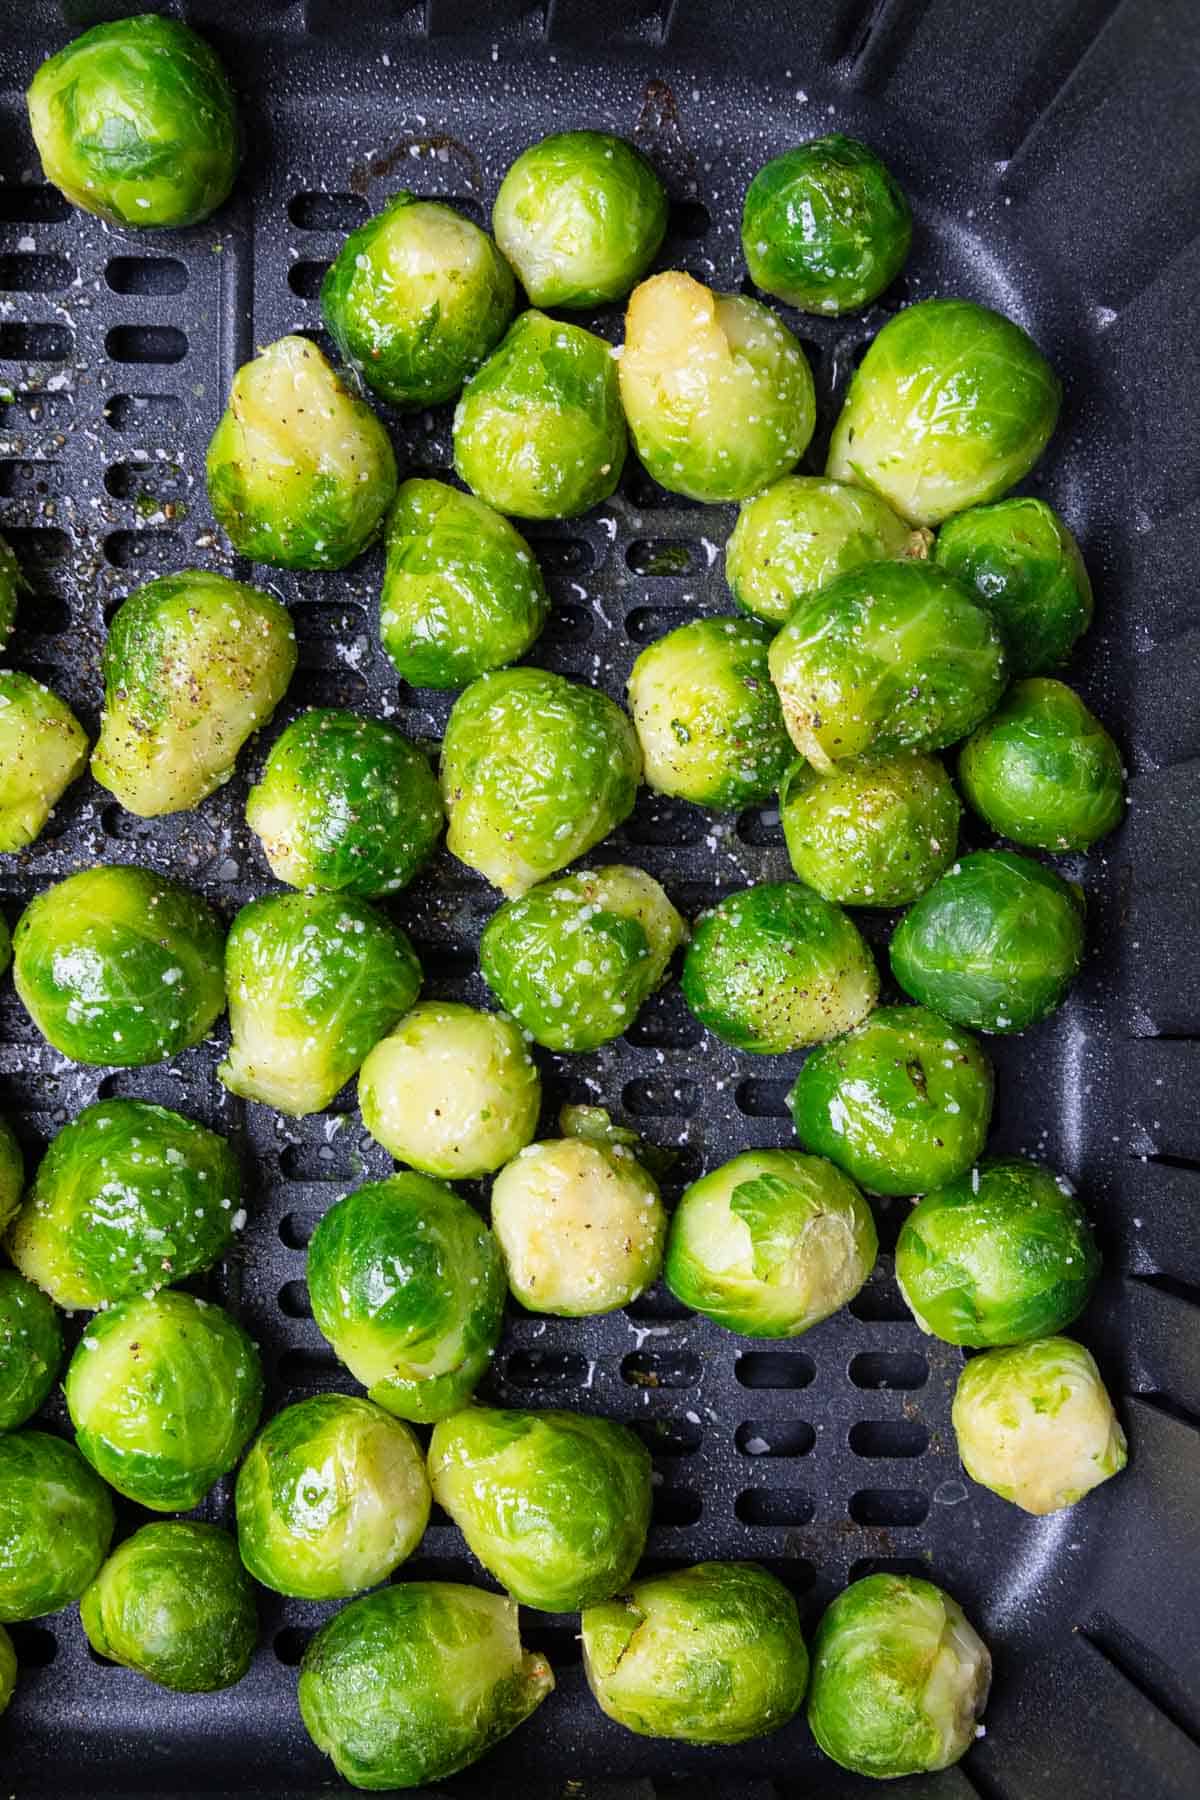 cooking brussels sprouts in an air fryer